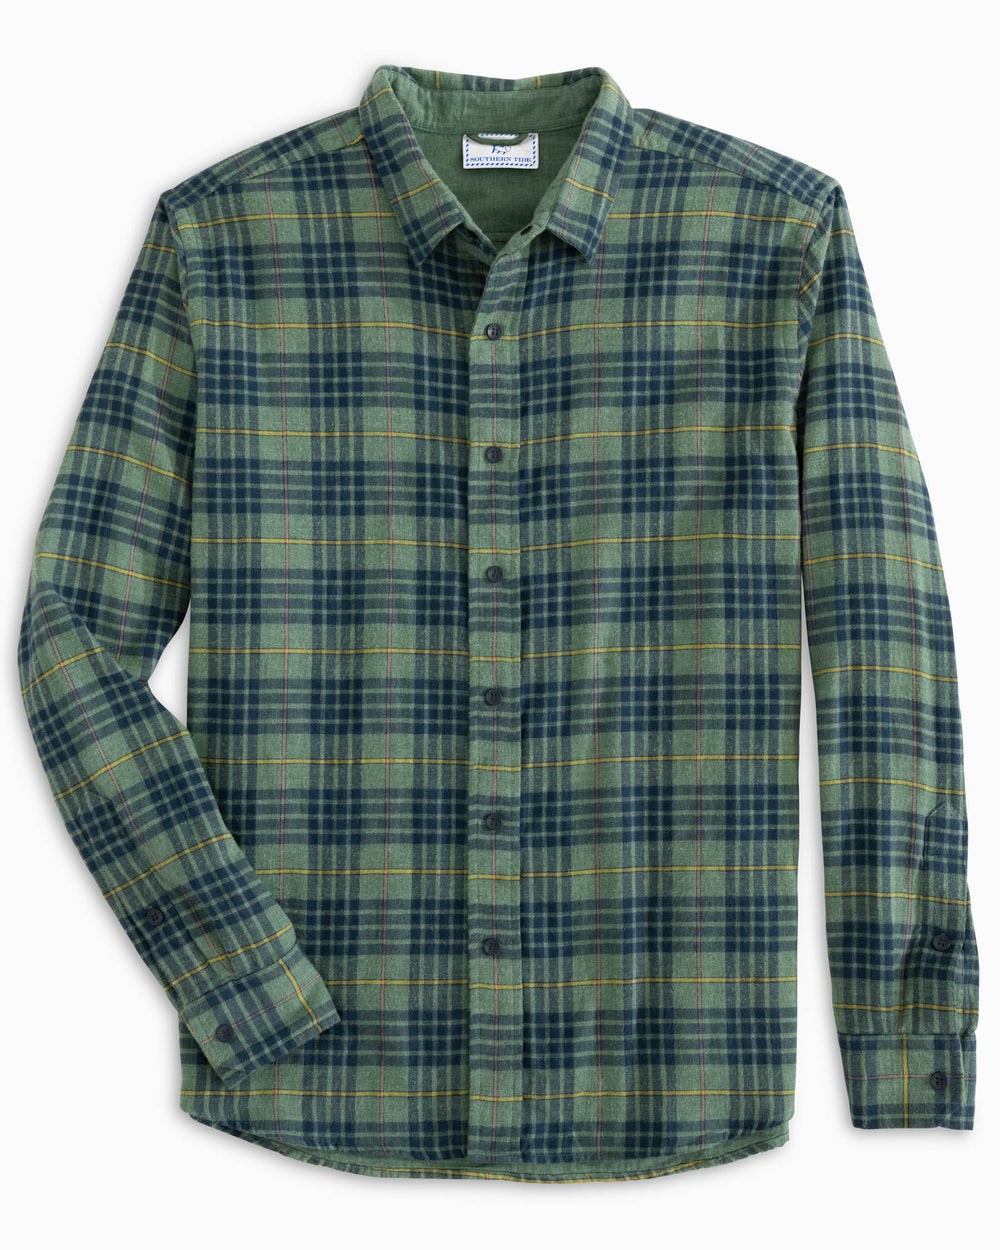 The front view of the Southern Tide Payton Heather Reversible Plaid Sport Shirt by Southern Tide - Heather Dark Ivy